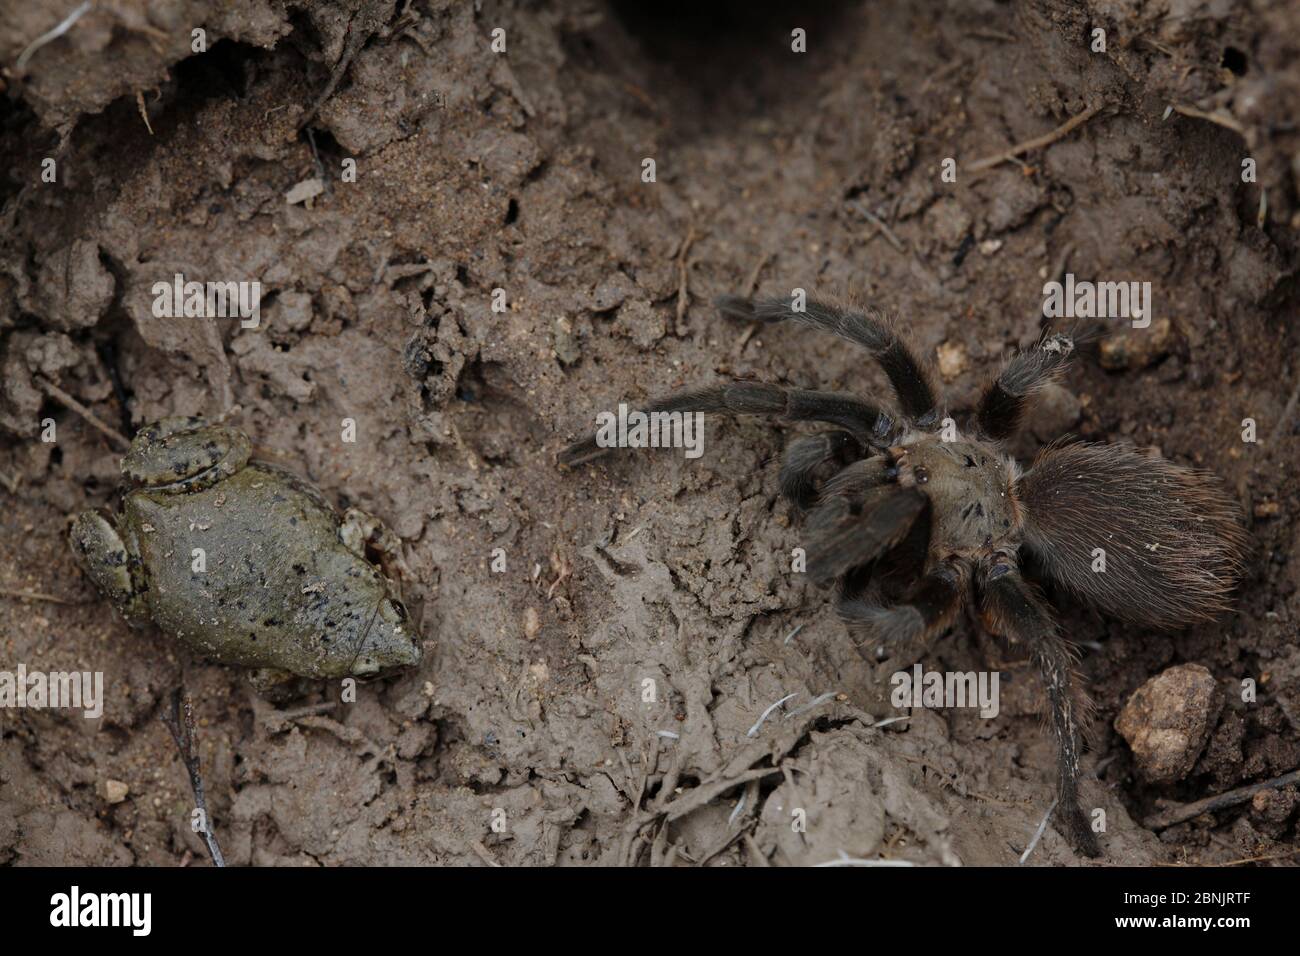 Great plains narrowmouth toad (Gastrophryne olivacea) and Tarantula (Aphonopelma sp) sharing  shelter under a rock, South Texas, USA, April. Stock Photo